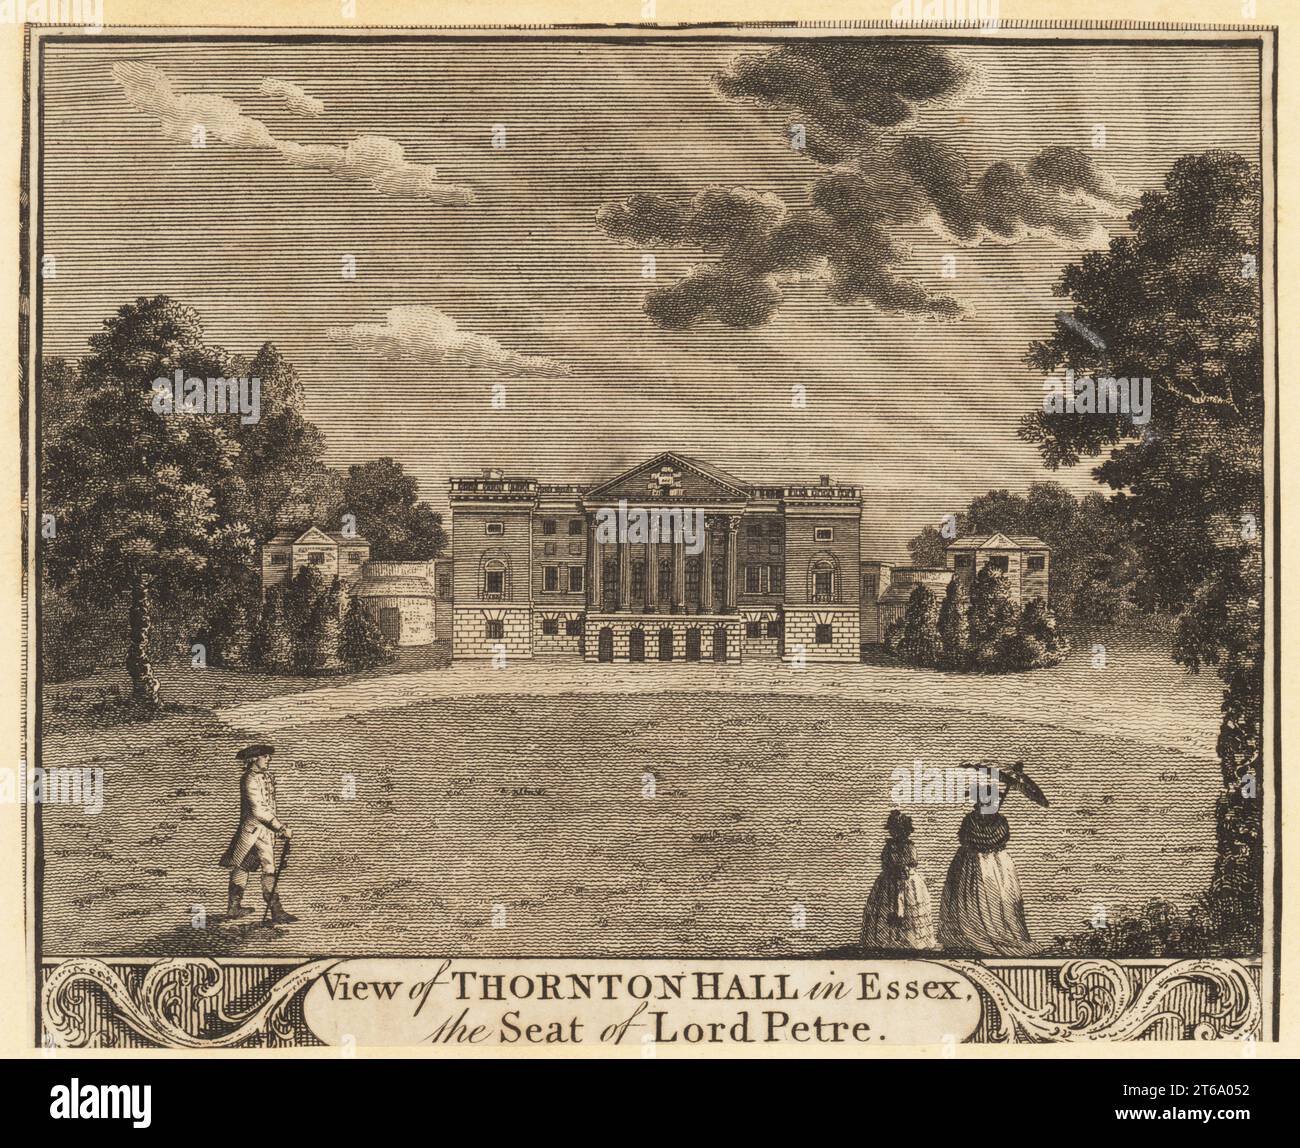 View of Thornton Hall in Essex, the seat of Lord Petre. Robert Edward Petre, 9th Baron Petre, 1742-1801. Georgian Palladian country house built by architect James Paine in 1764. View from the park, driveway in front of the colonnade, three figures in the foreground, one woman holding an open parasol. Copperplate engraving from William Thorntons New, Complete and Universal History of the City of London, Alexander Hogg, King's Arms, No. 16 Paternoster Row, London, 1784. Stock Photo